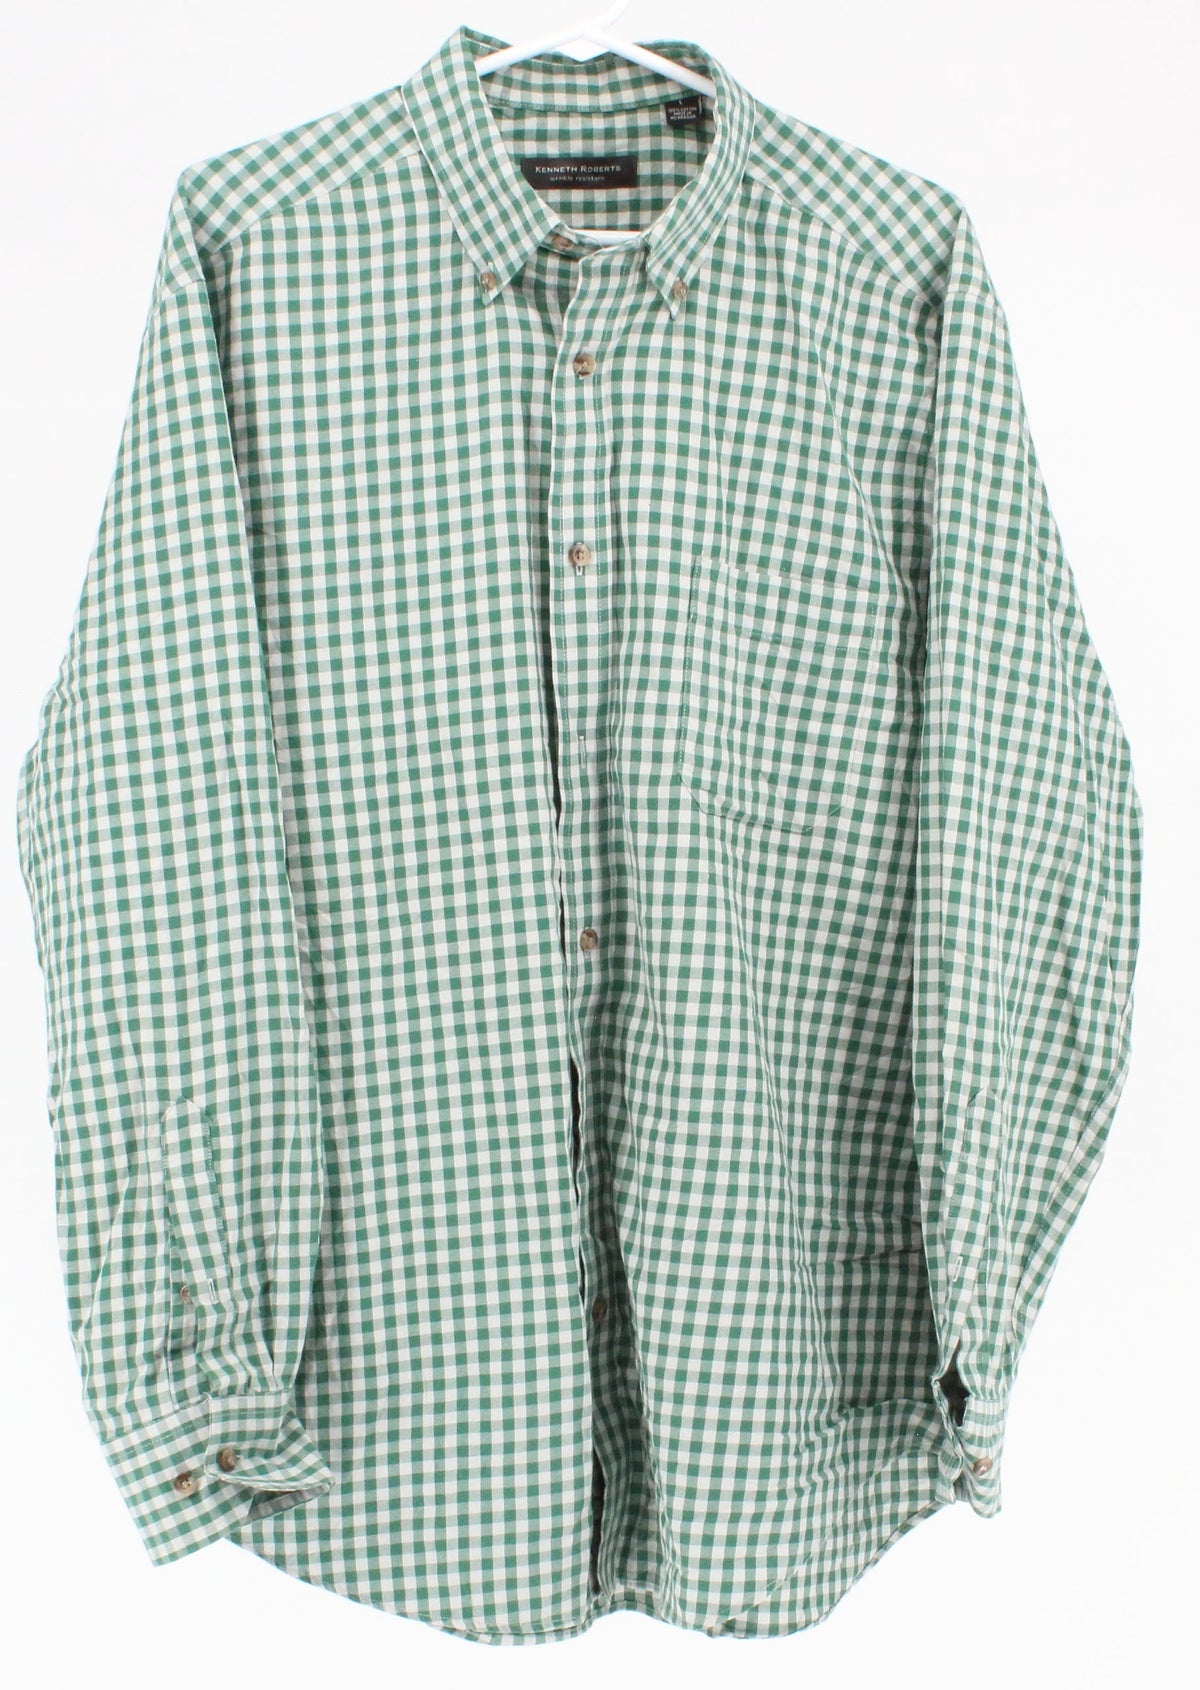 Kenneth Roberts Wrinkle Resistant Green & White Check Print Shirt